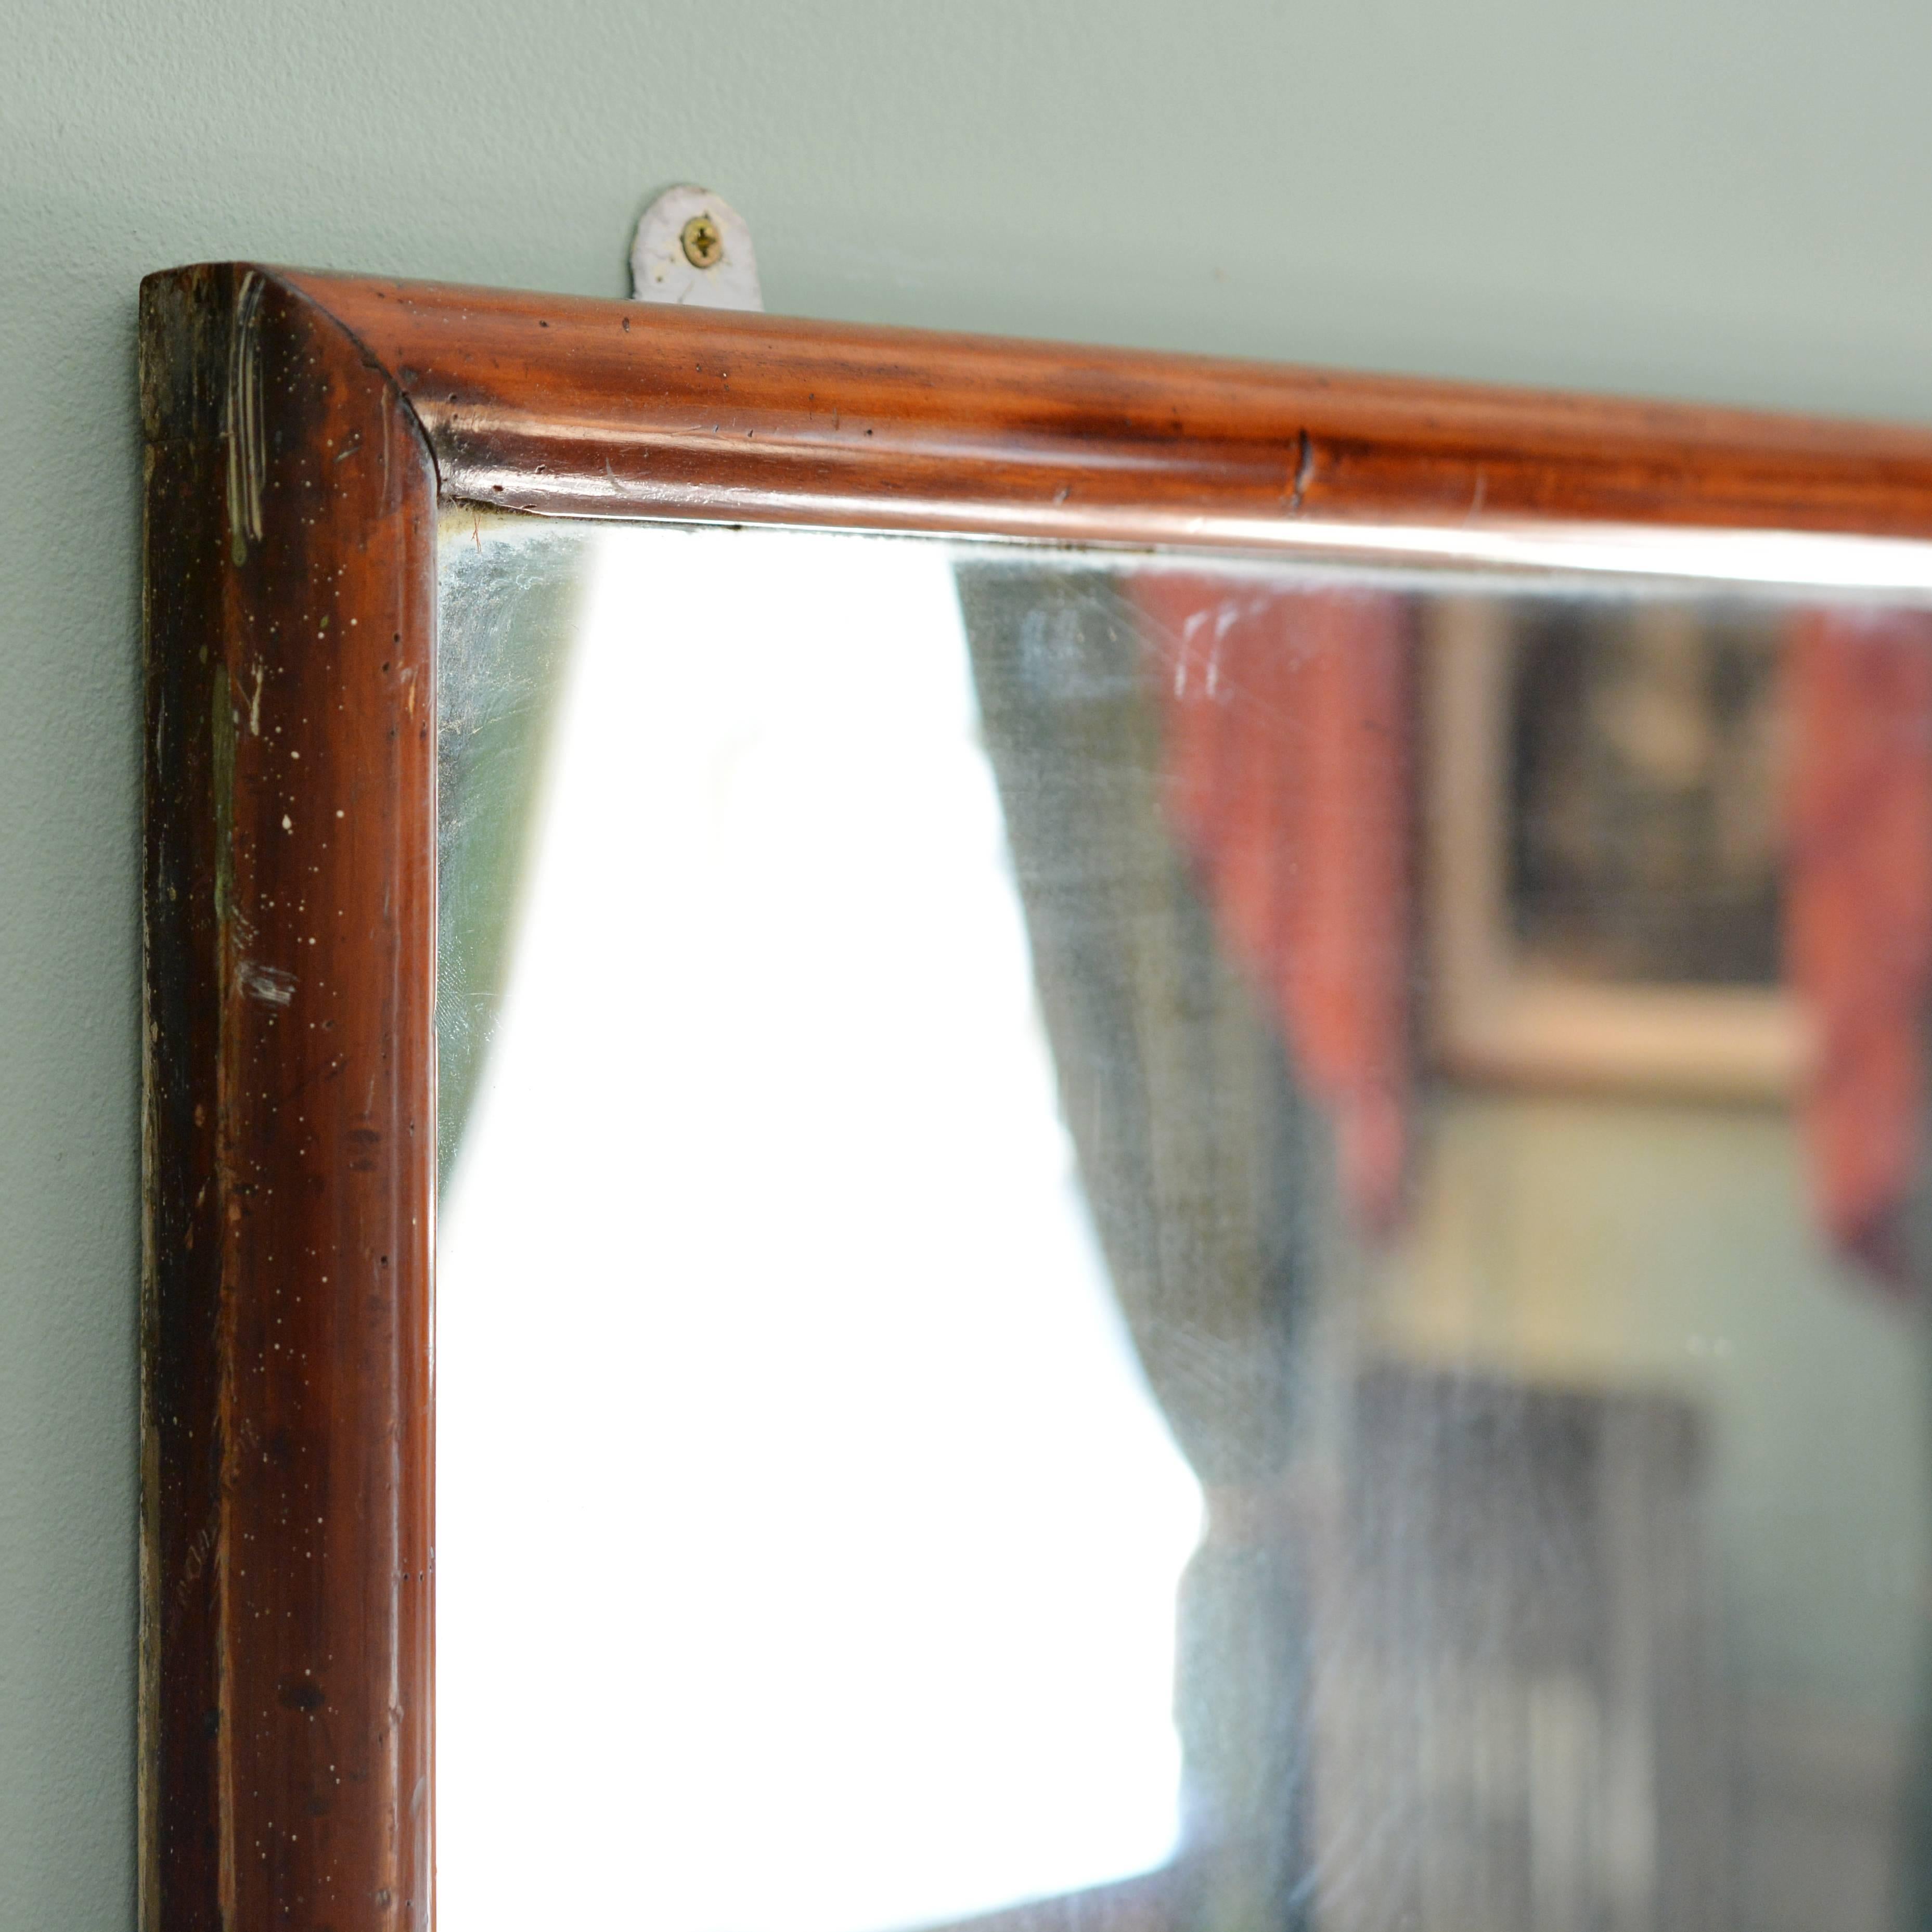 An early 20th century mahogany framed shop mirror. Can be hung portrait or landscape.

Available to view at Brunswick House, London.

Dimensions: 101cm (39¾